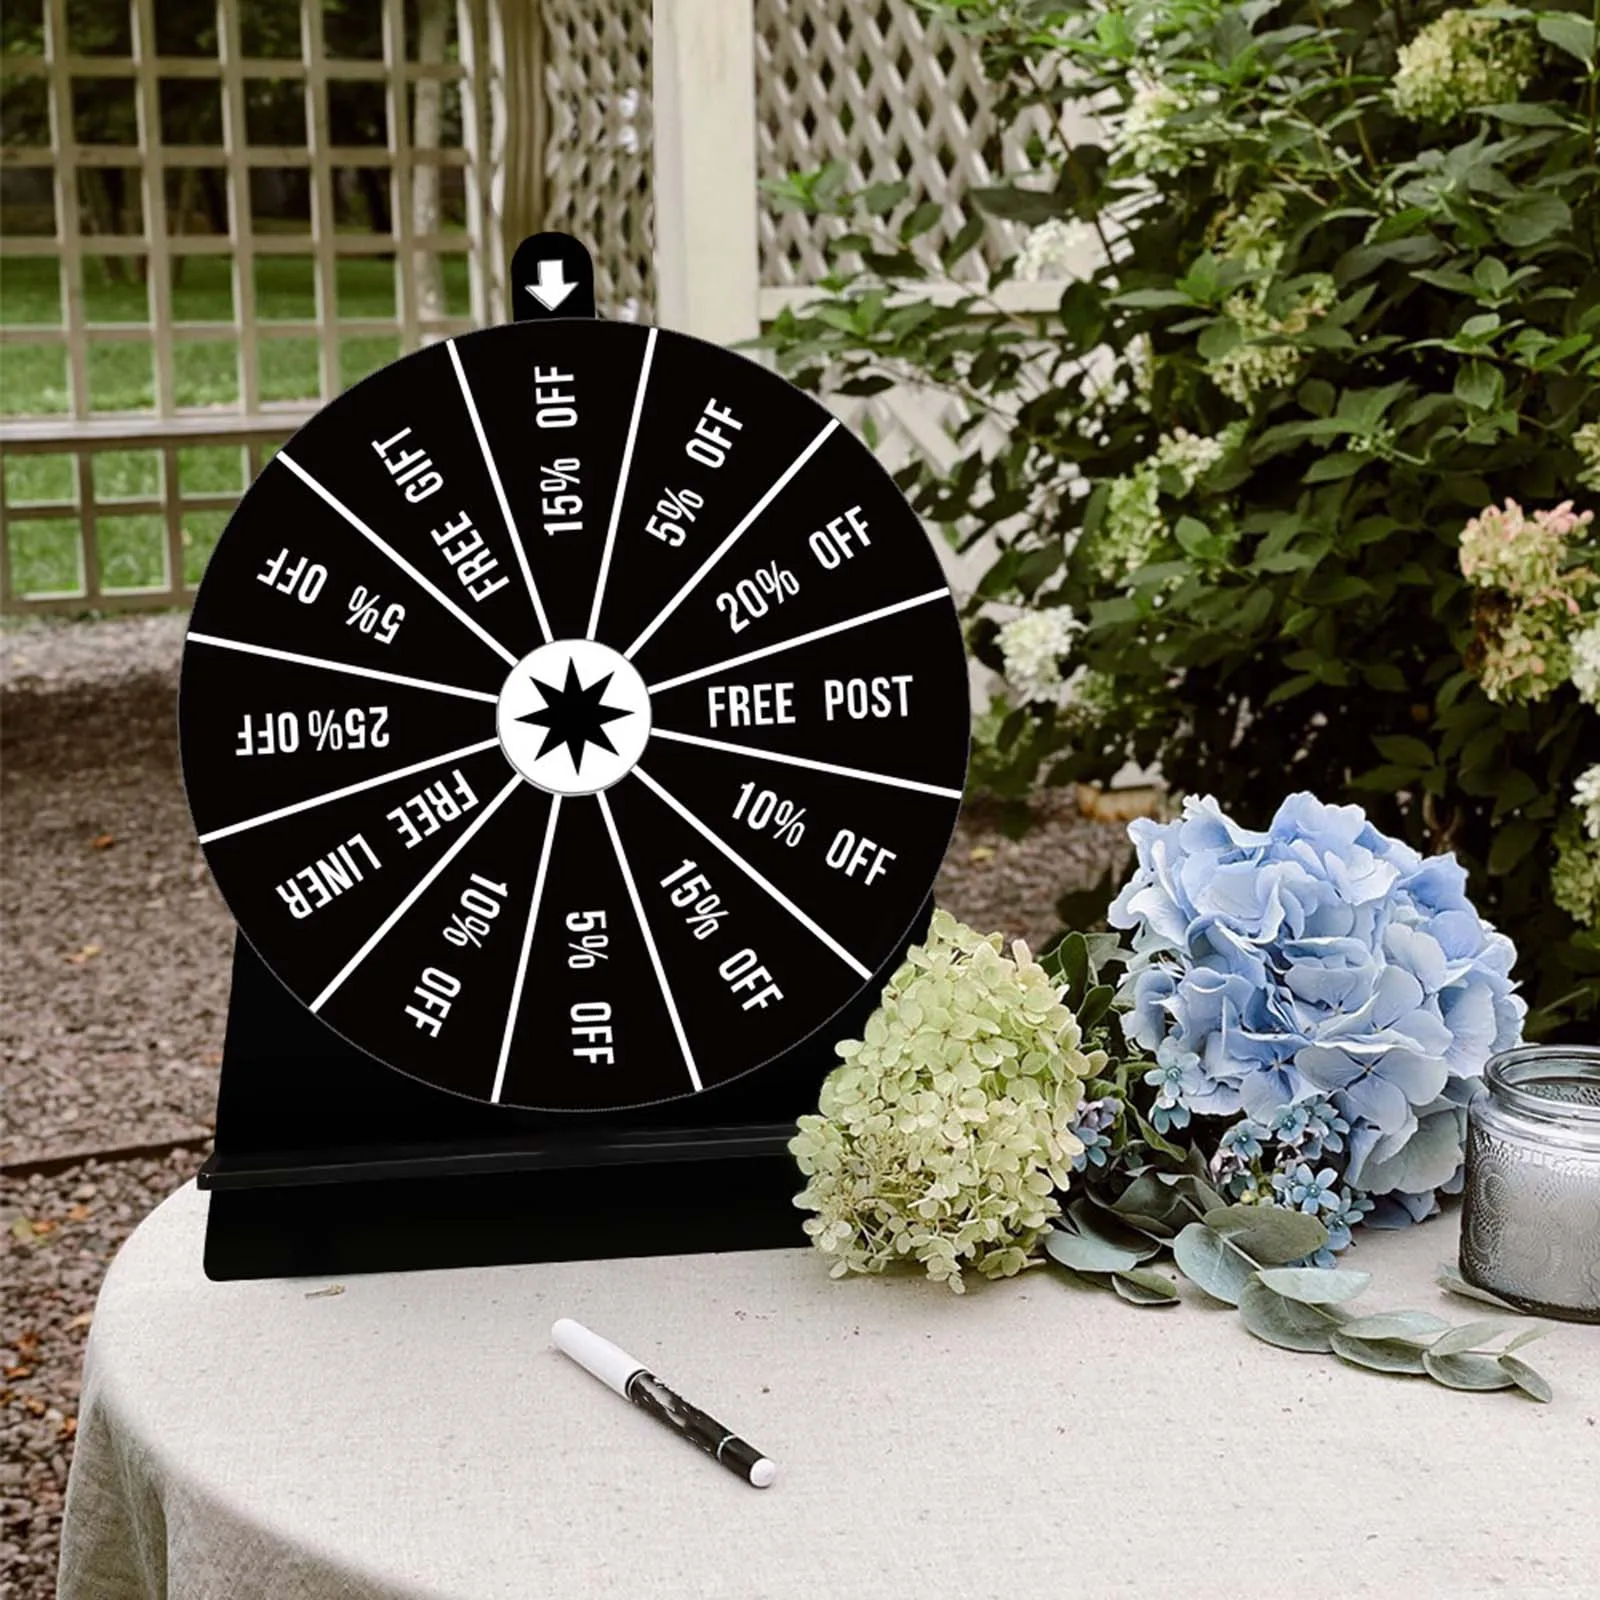 How to DIY: Drink Spin-the-Wheel Game For Your Wedding Bar – Kimposed